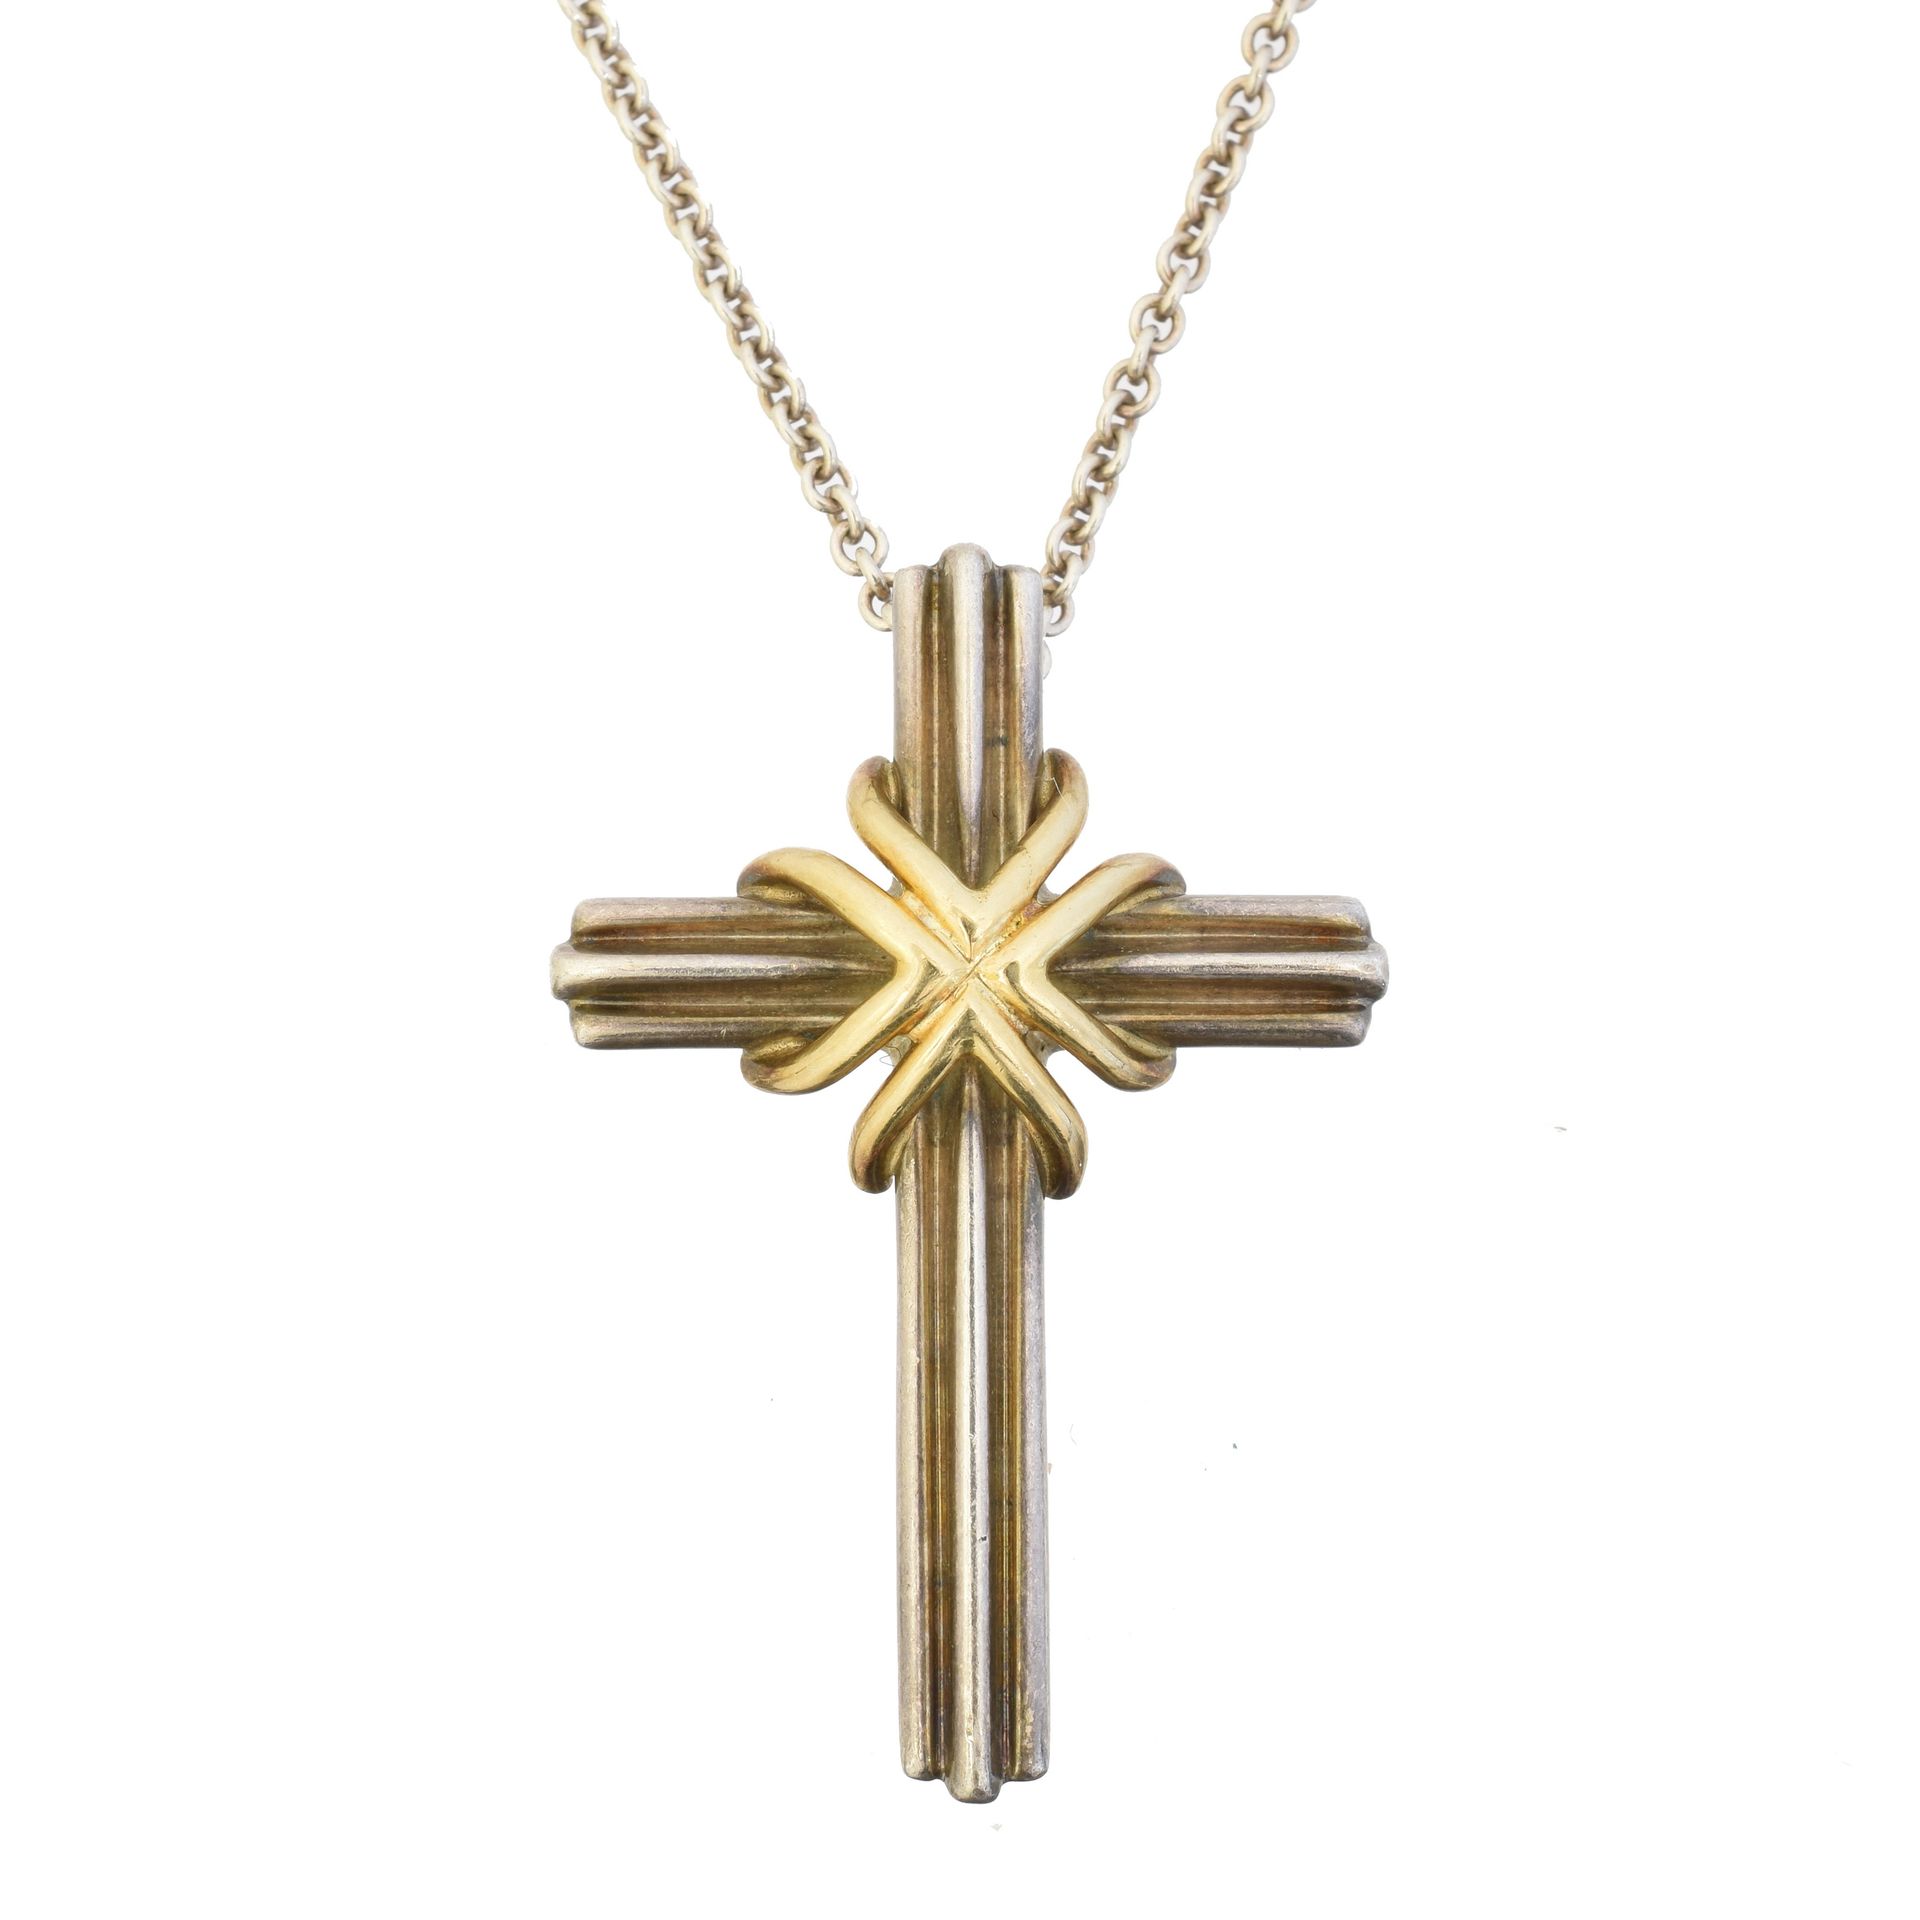 A Tiffany & Co. Silver and gold cross pendant, 
A Tiffany & Co. Silver and gold &hellip;